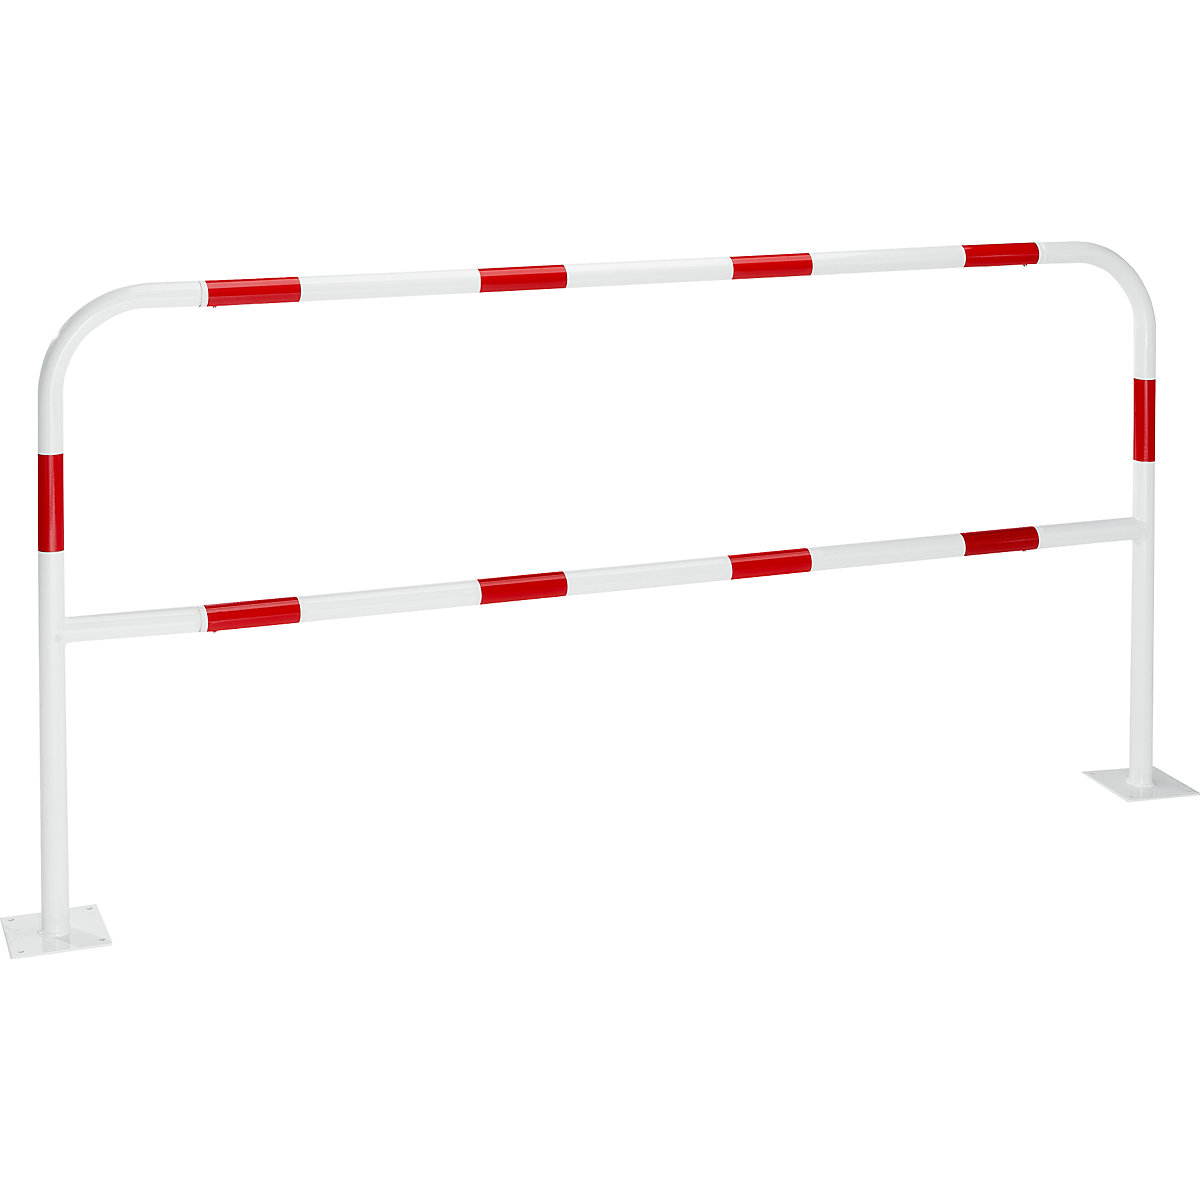 Safety rail for danger zones, to bolt in place, red / white, width 2000 mm-13